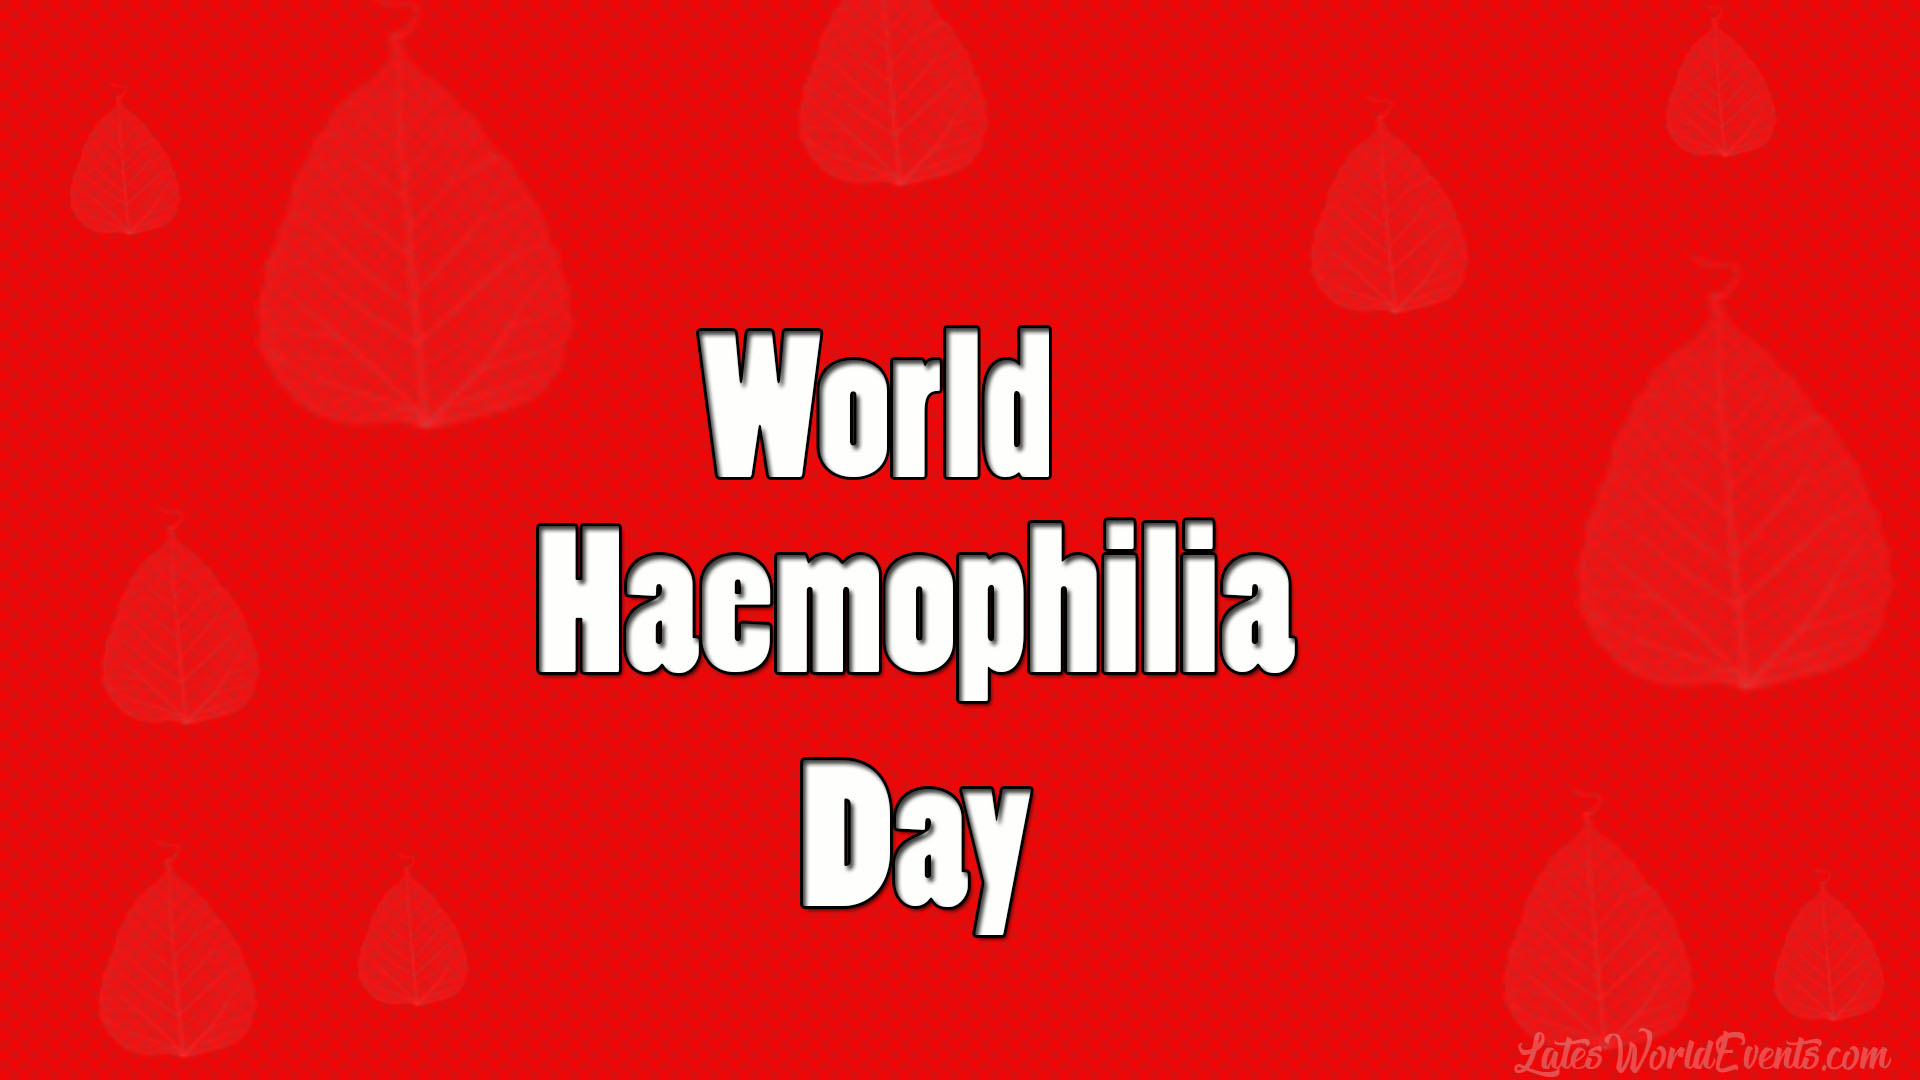 Download-haemophilia-day-cards-images